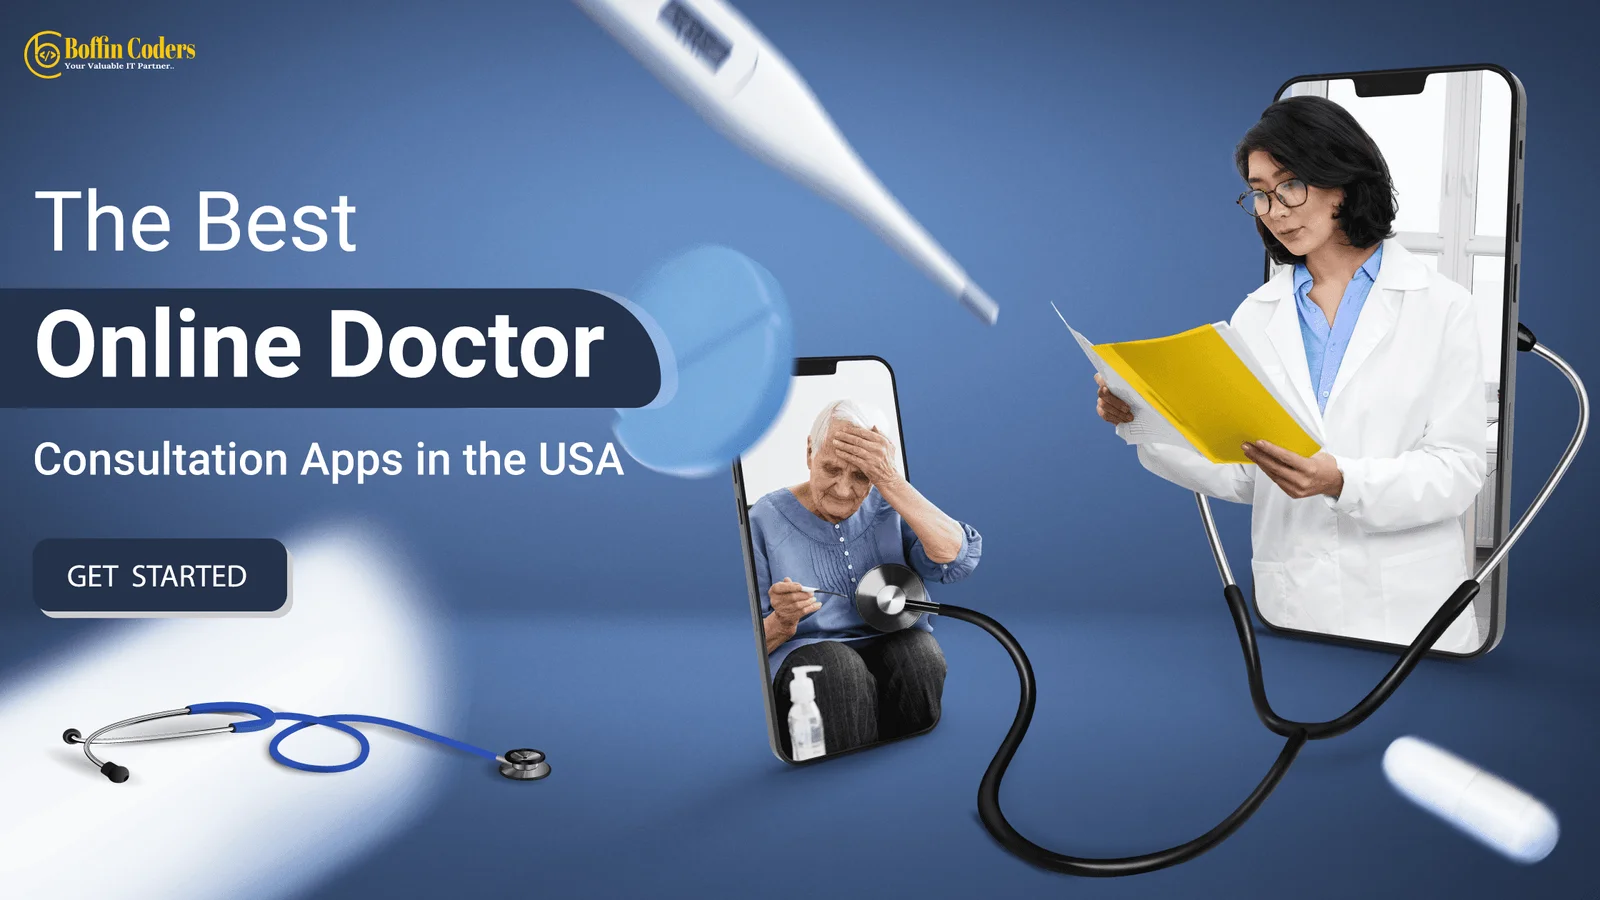 The Best Online Doctor Consultation Apps in the USA